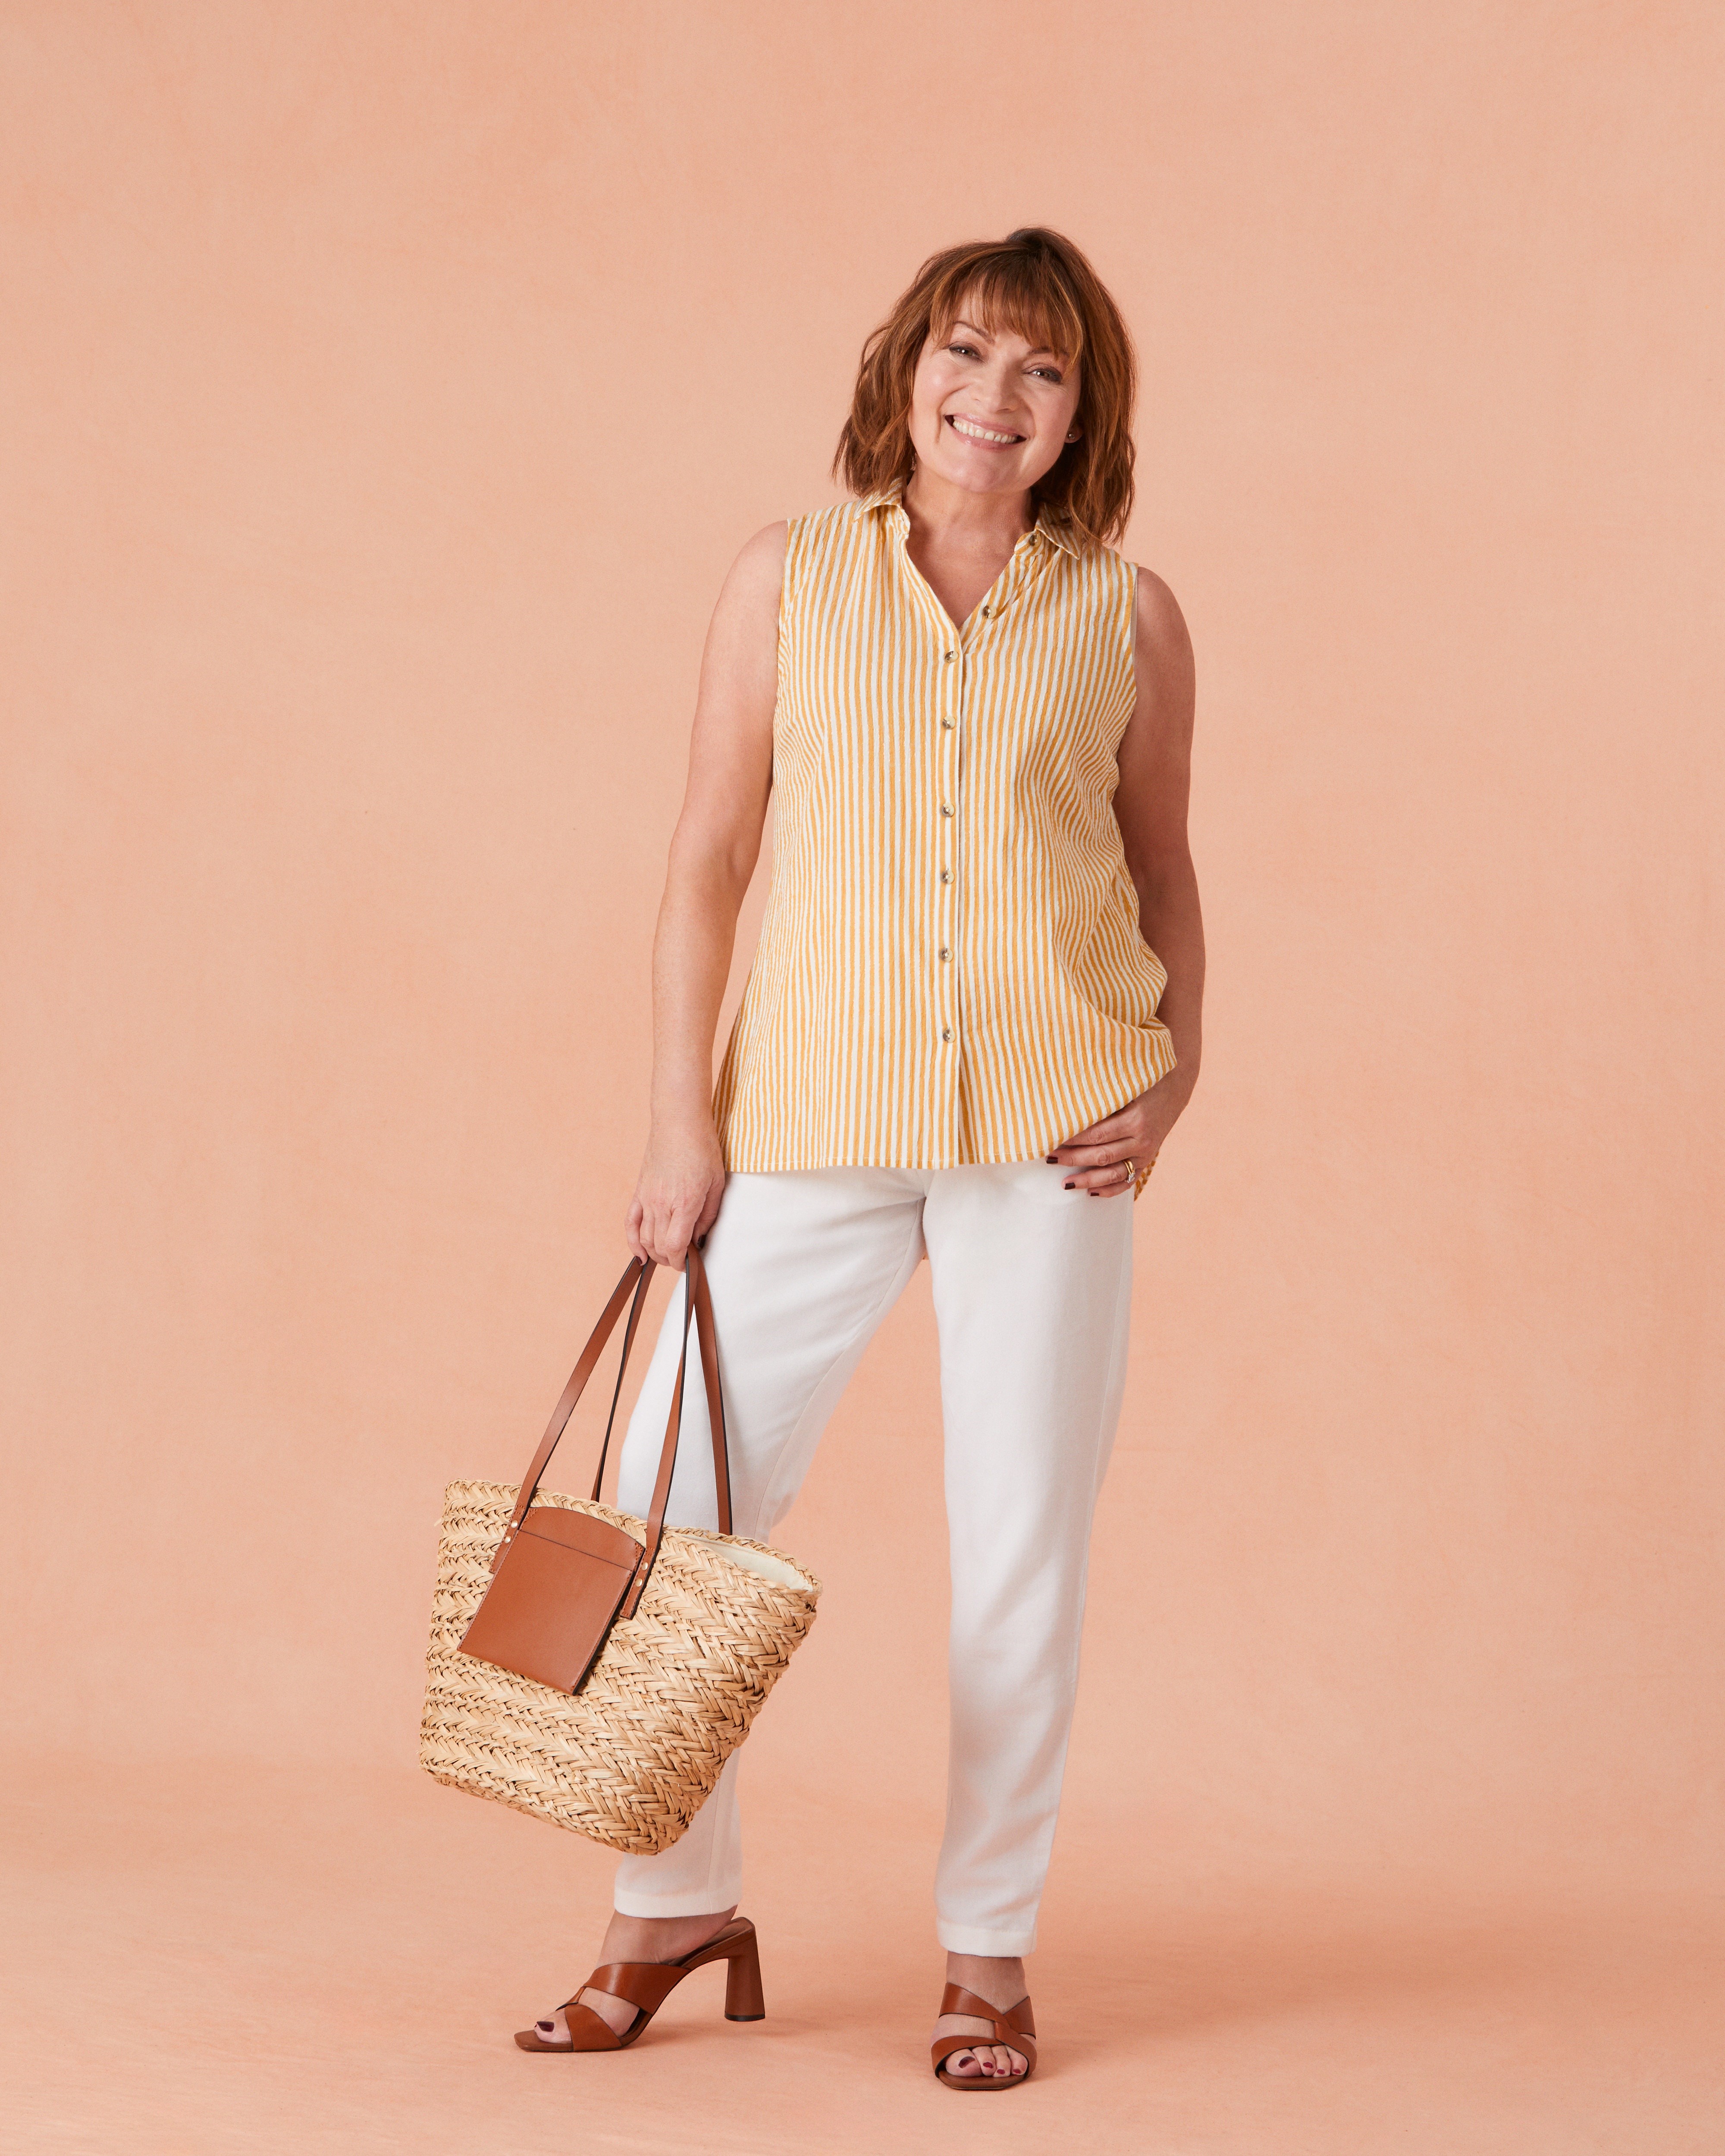 Bonmarche High Summer Collection With Lorraine Kelly